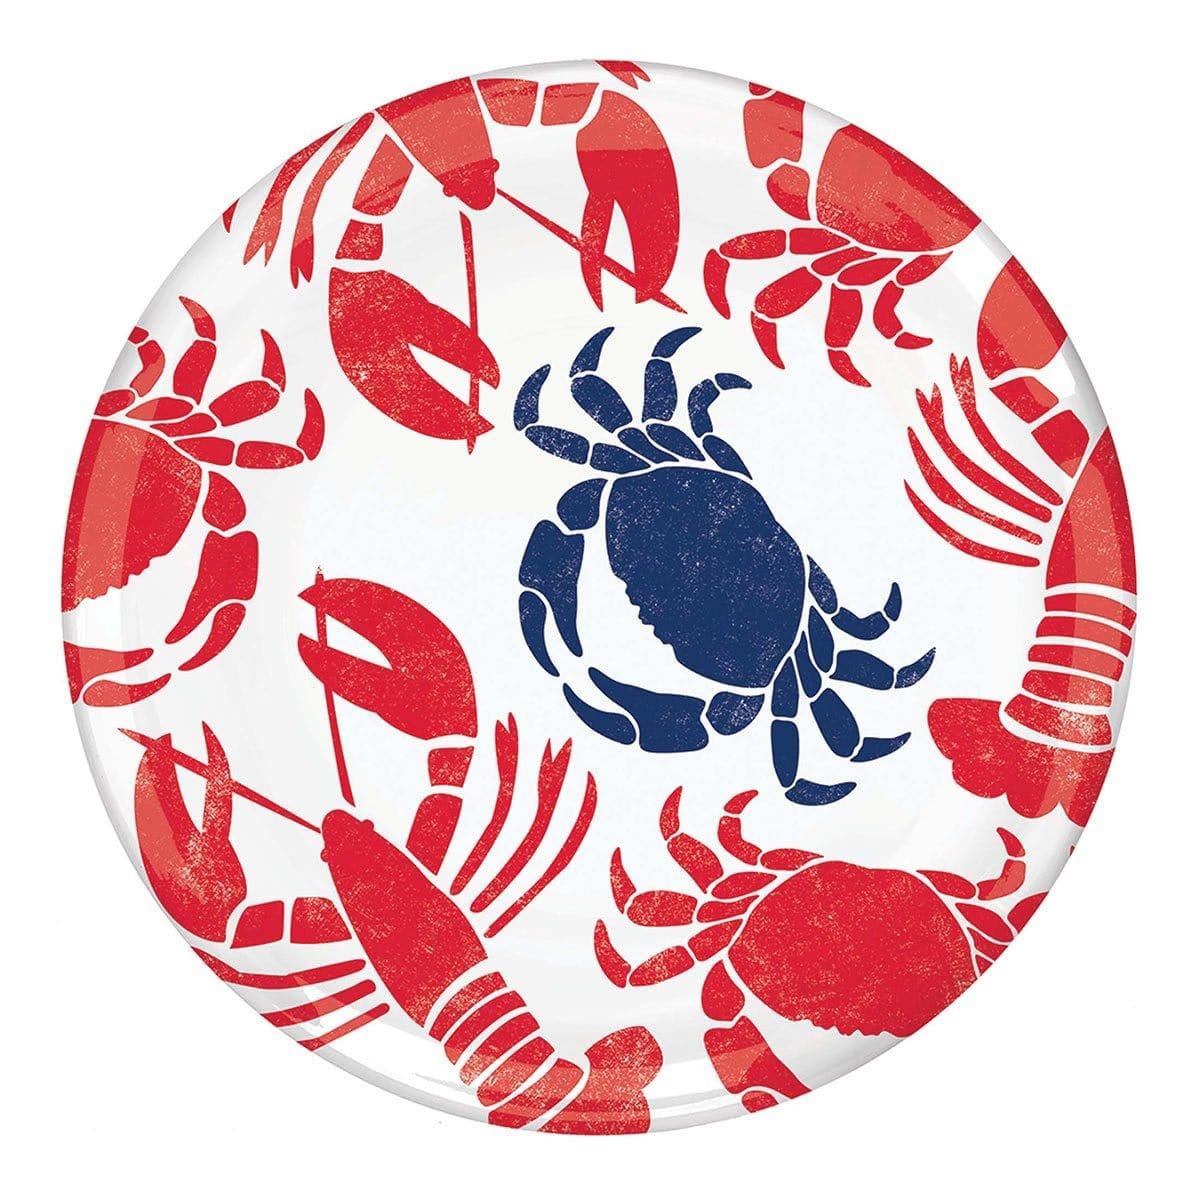 Buy Theme Party Seafood Round Platter sold at Party Expert